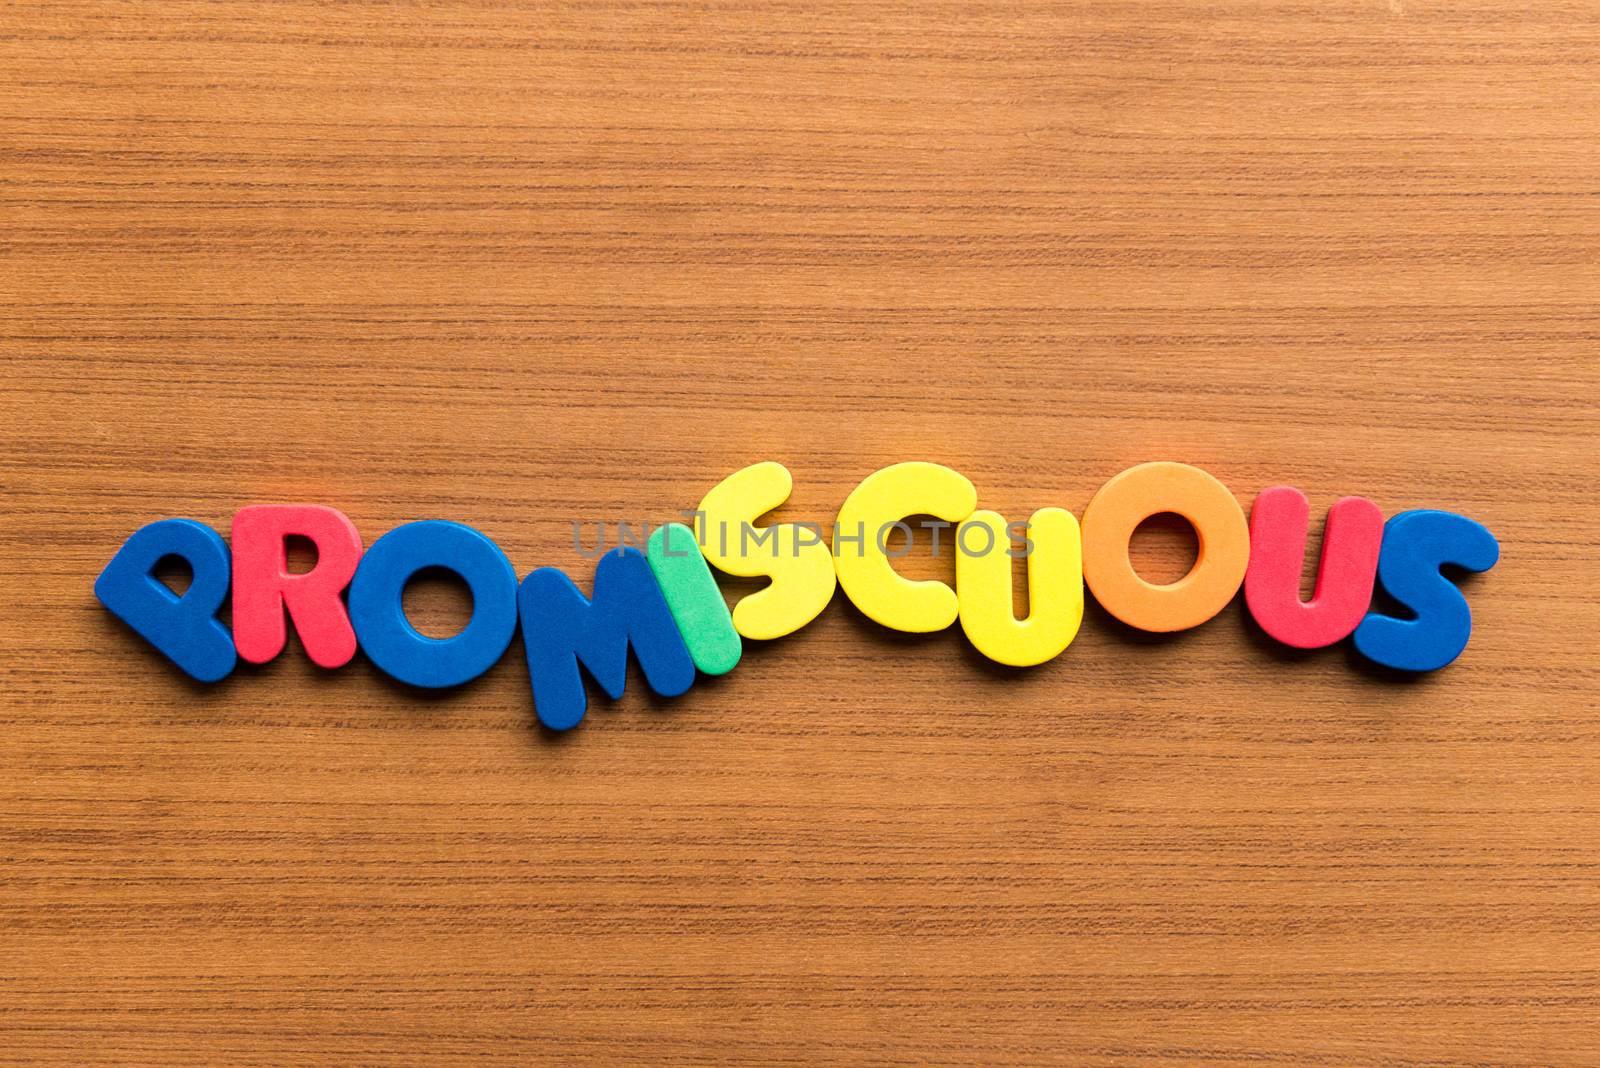 promiscuous colorful word on the wooden background